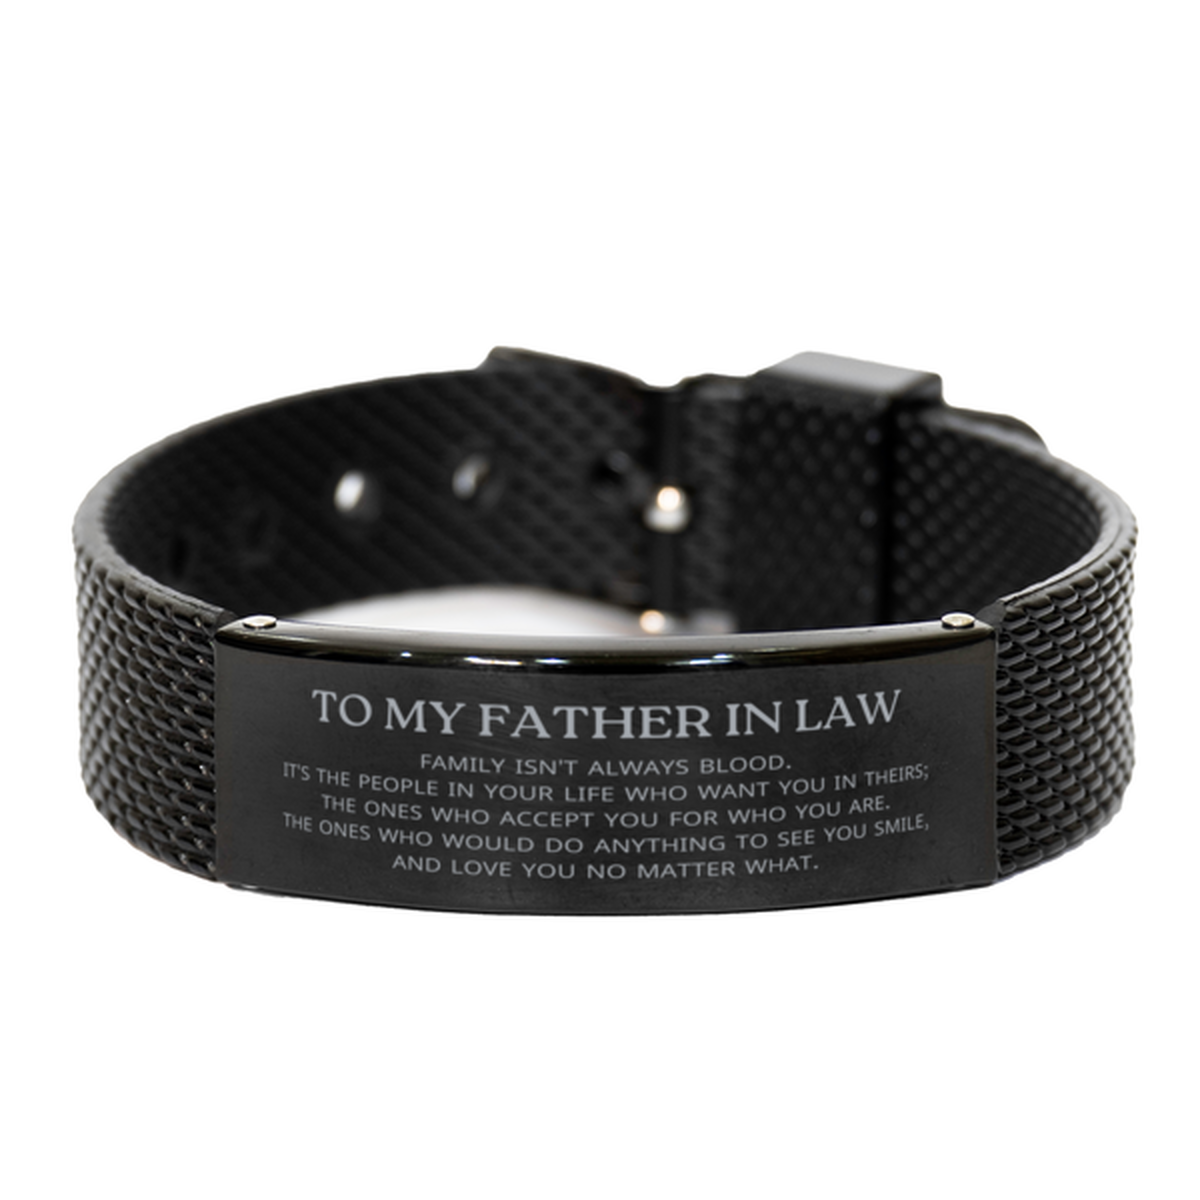 To My Father In Law Gifts, Family isn't always blood, Father In Law Black Shark Mesh Bracelet, Birthday Christmas Unique Present For Father In Law